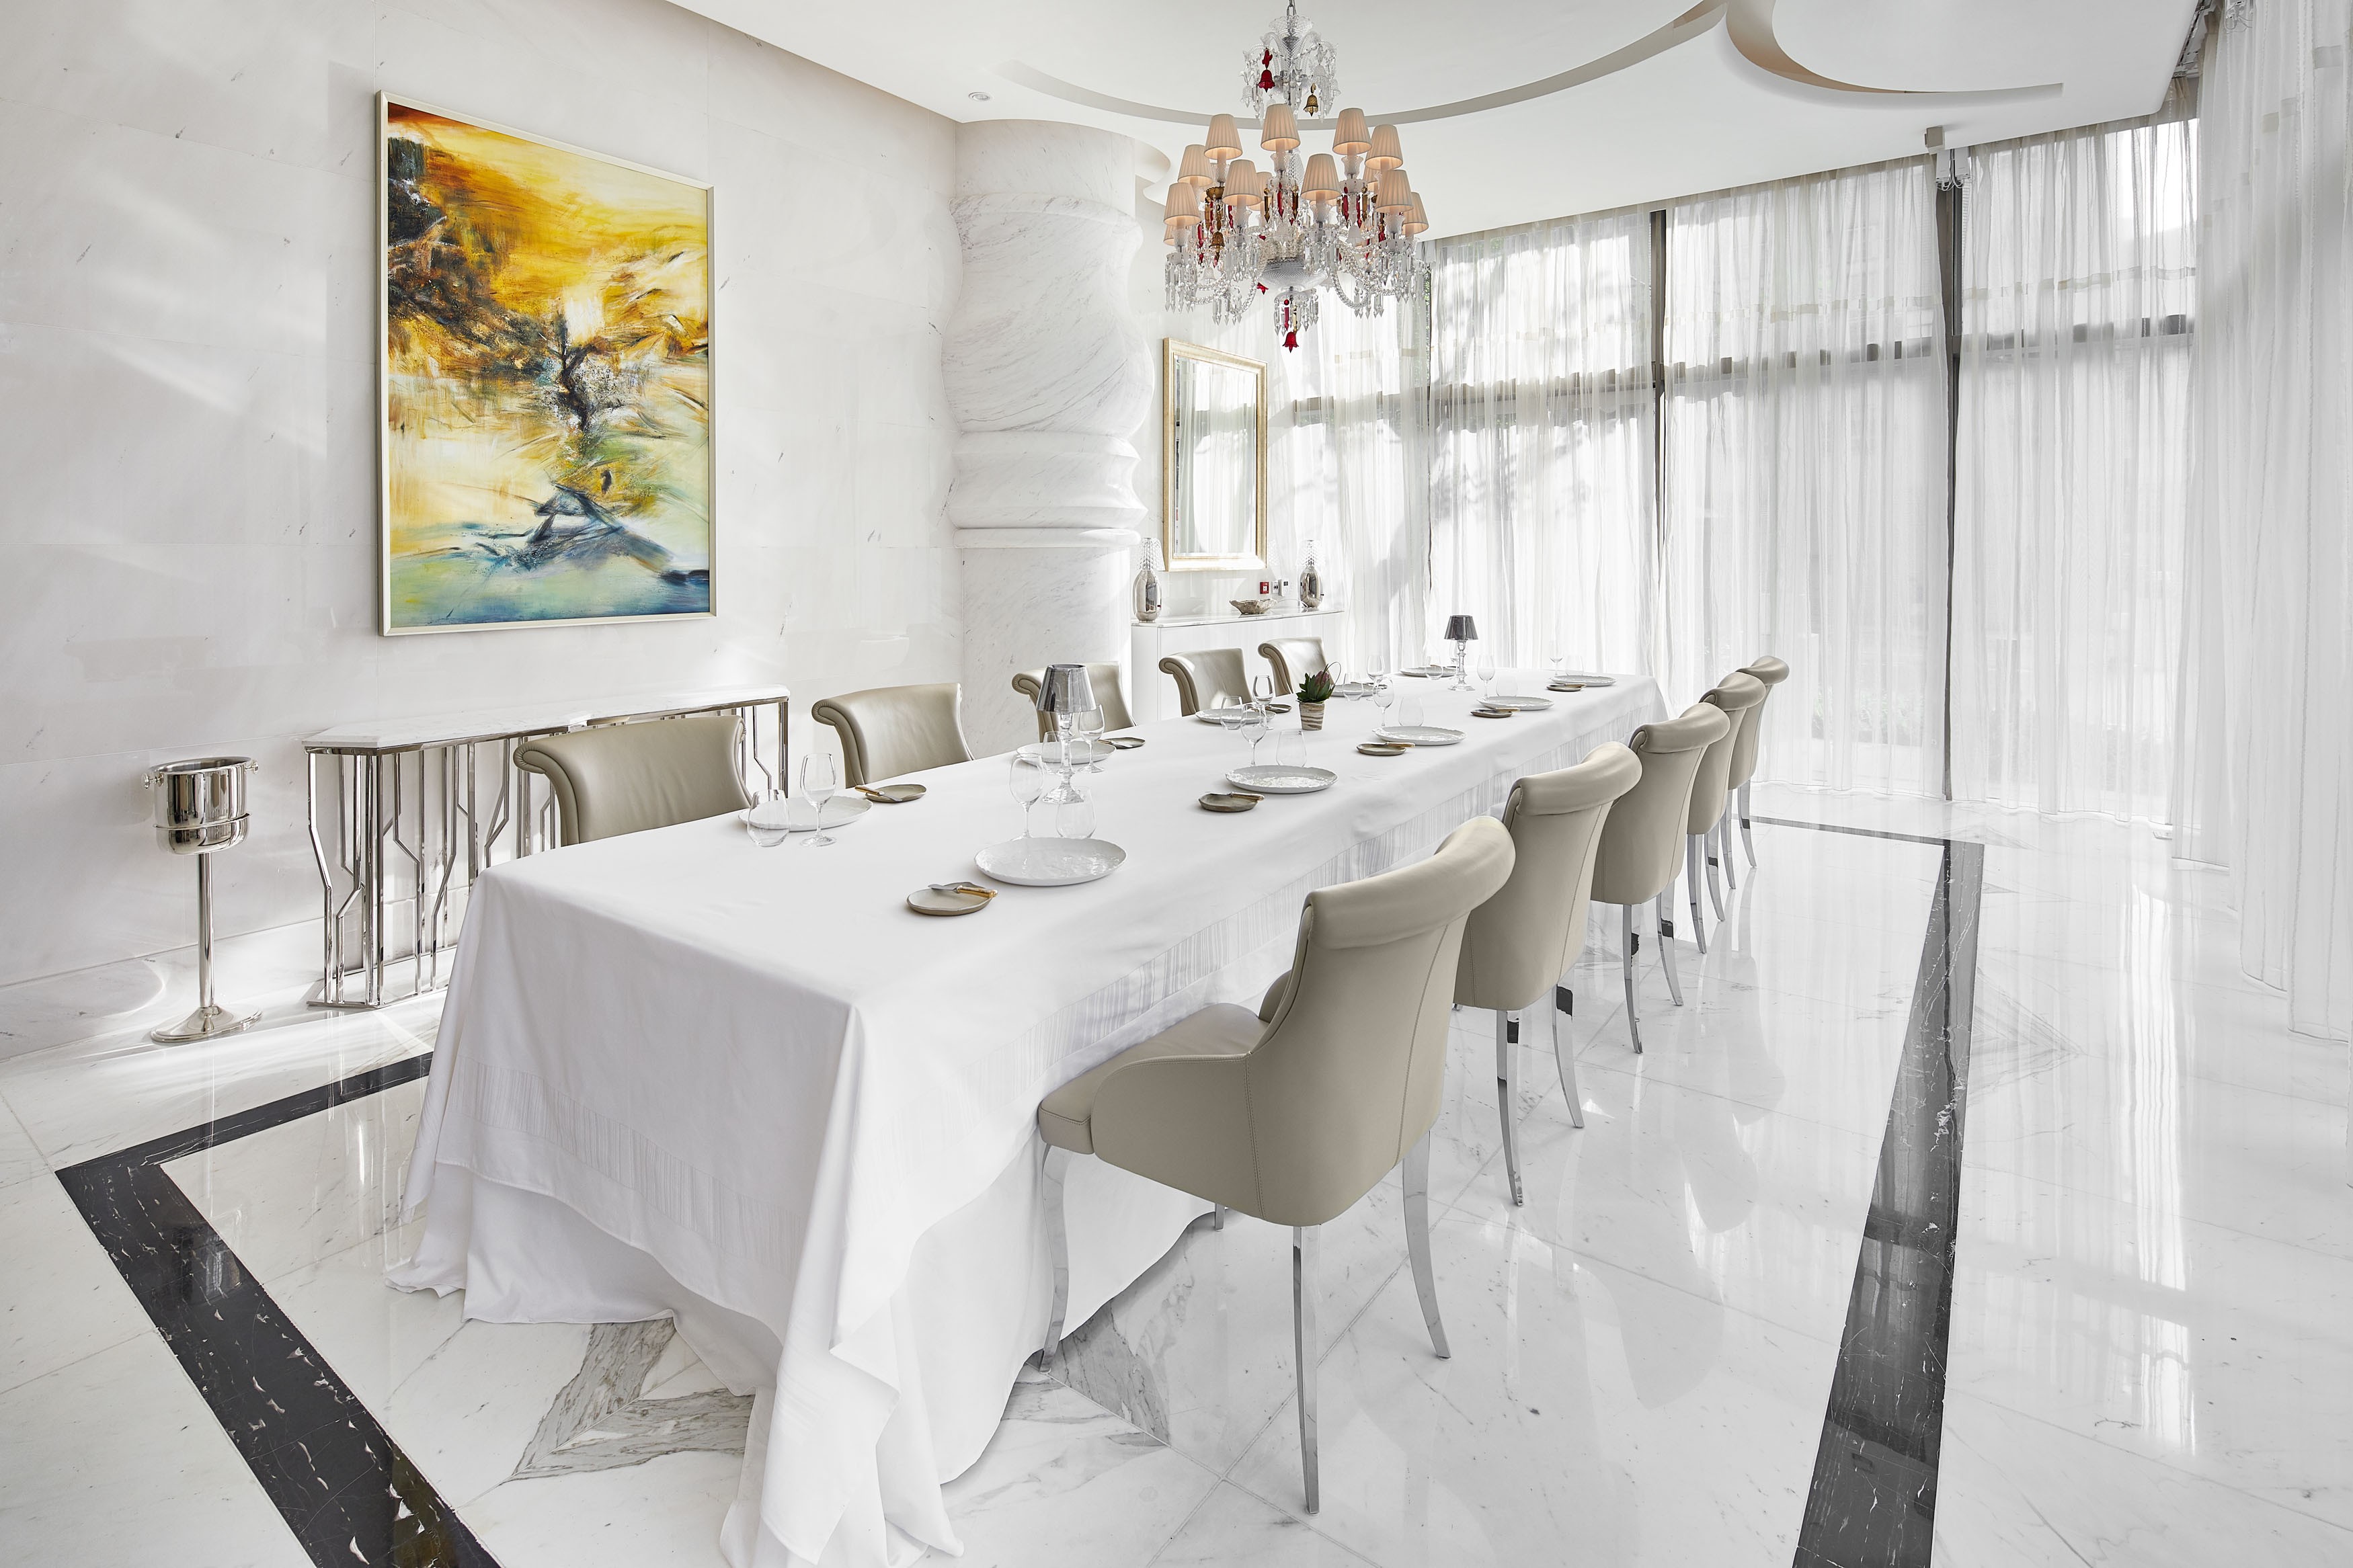 The private dining area at Le Pan – the restaurant’s white palette gives the interior a feeling of spaciousness. Photos: handouts